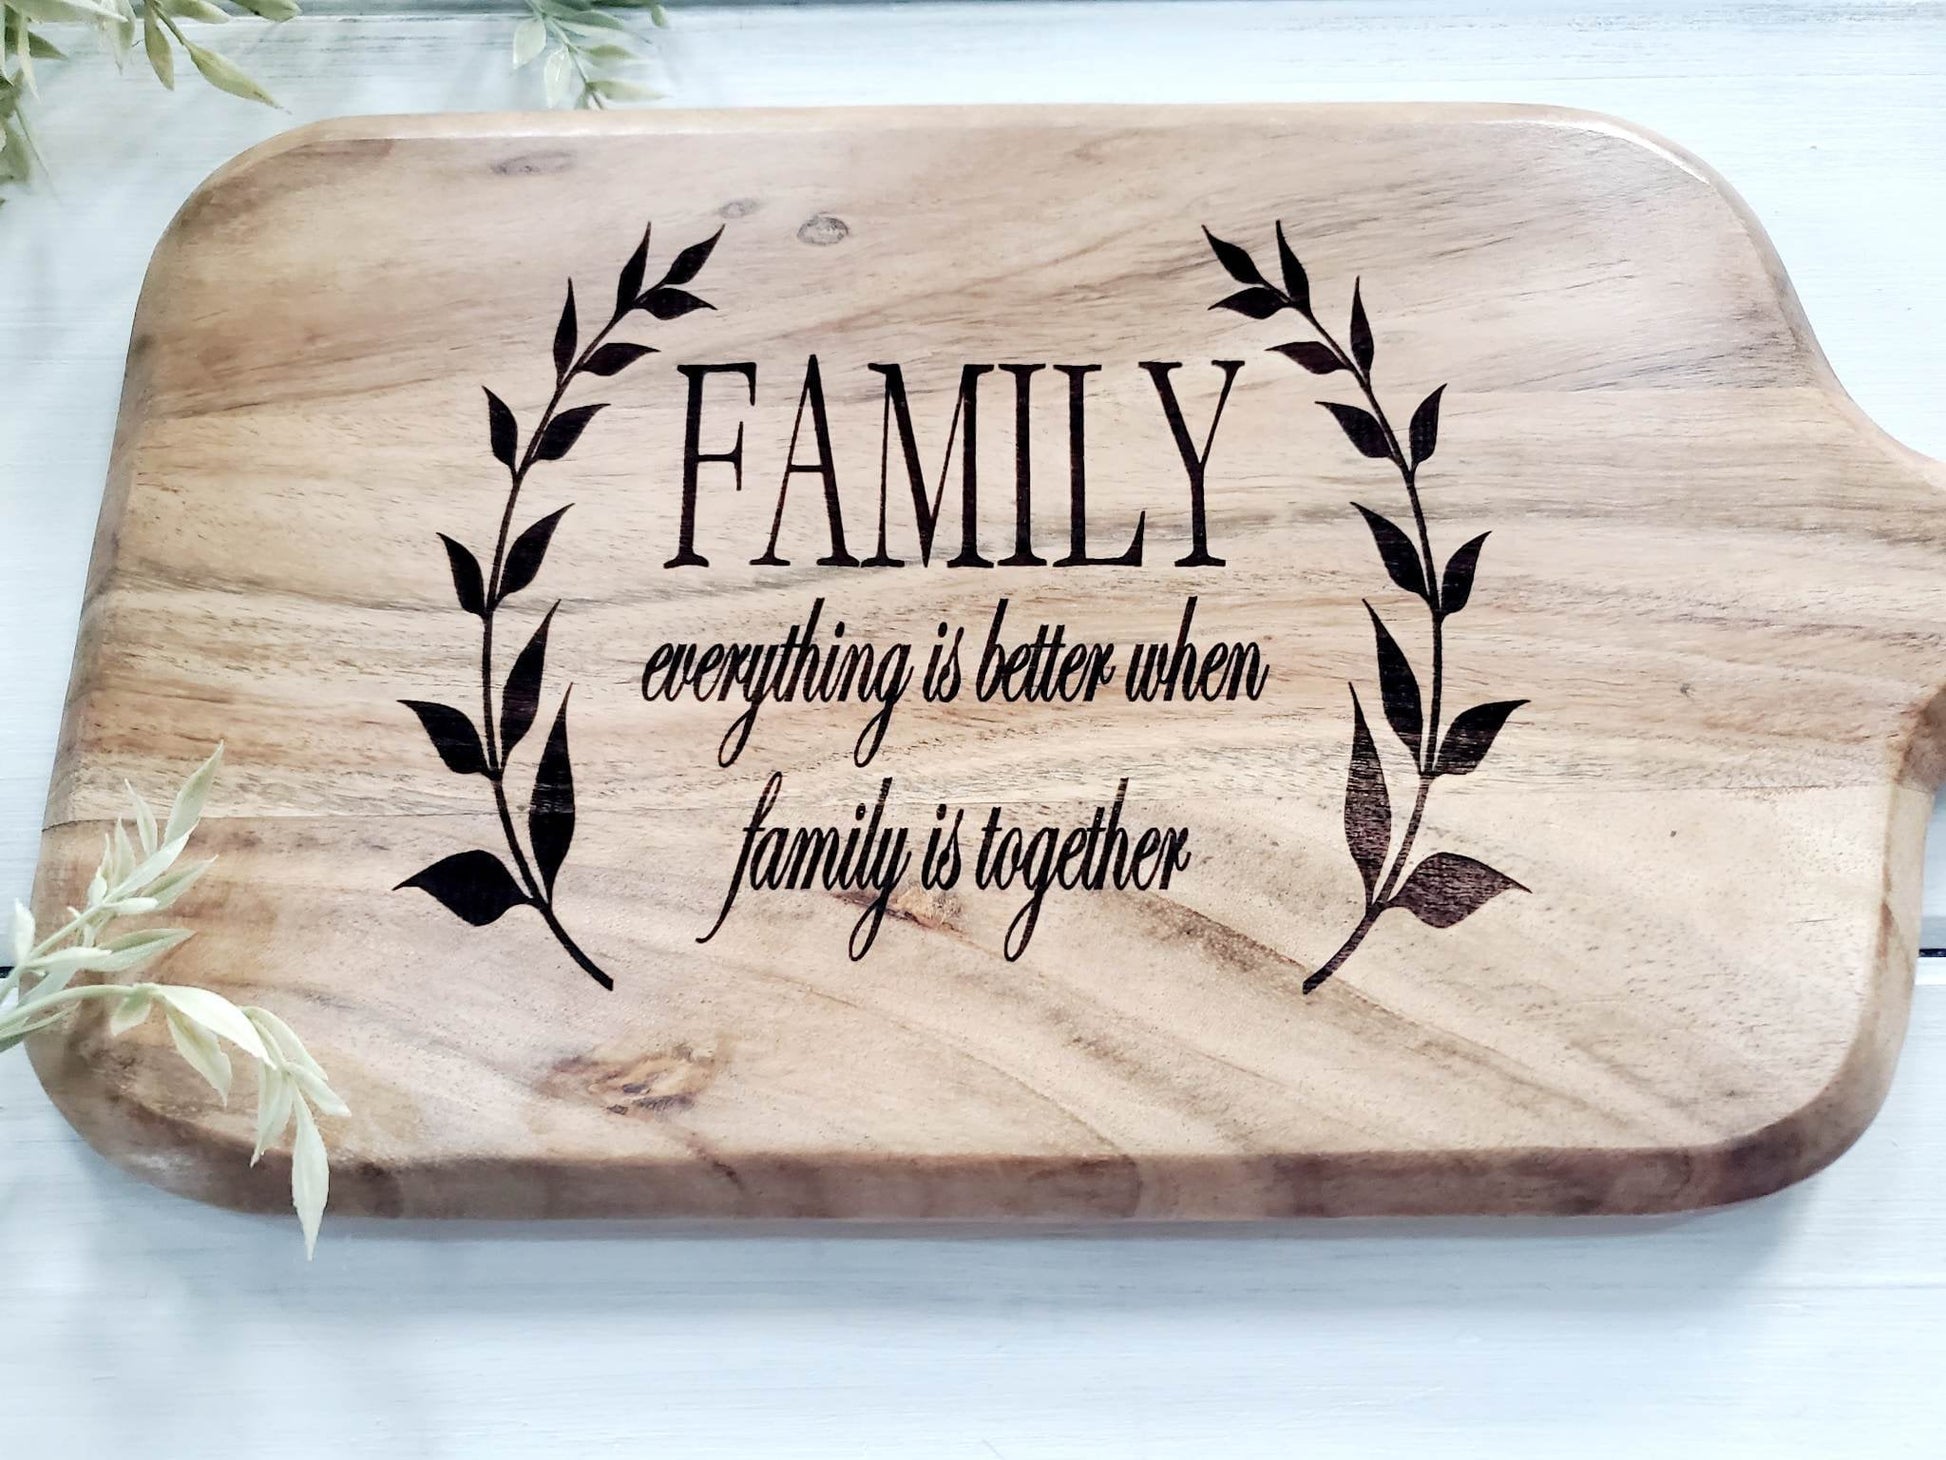 Bamboo Cutting Board Decor the Secret Ingredient is Always Love